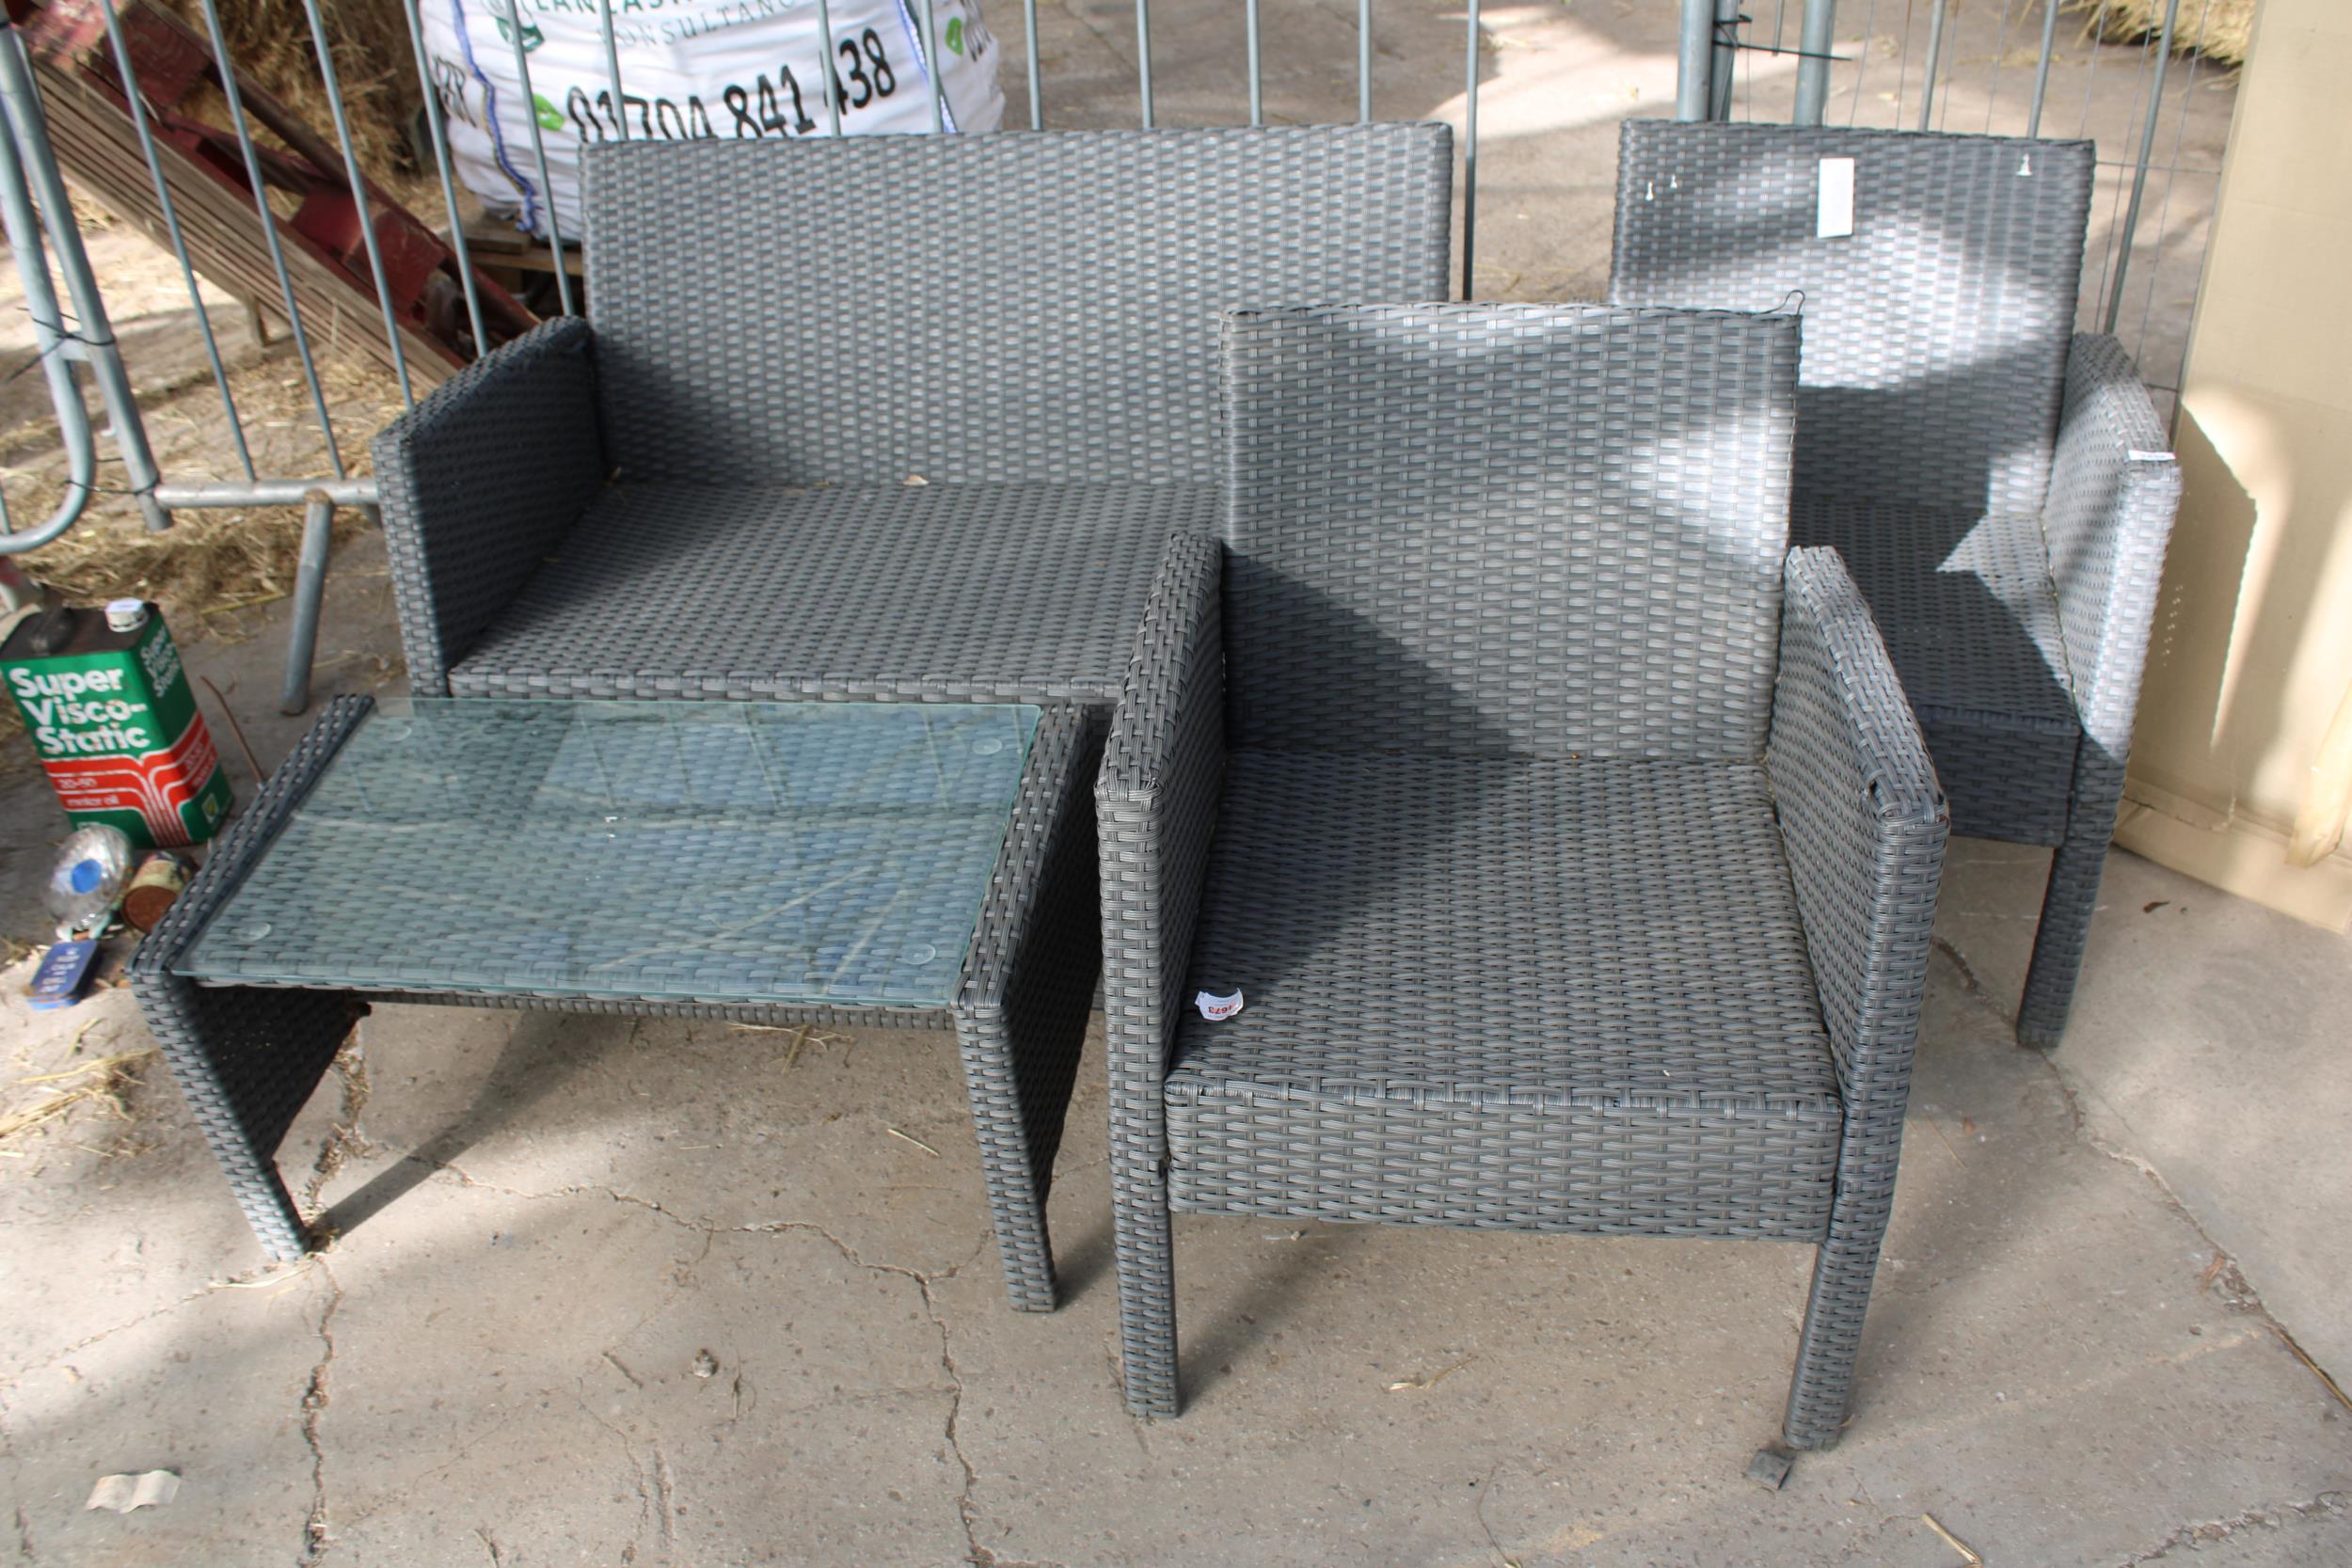 A RATTAN GARDEN FURNITURE SET COMPRISING OF A TWO SEATER BENCH, TWO CHAIRS AND A COFFEE TABLE